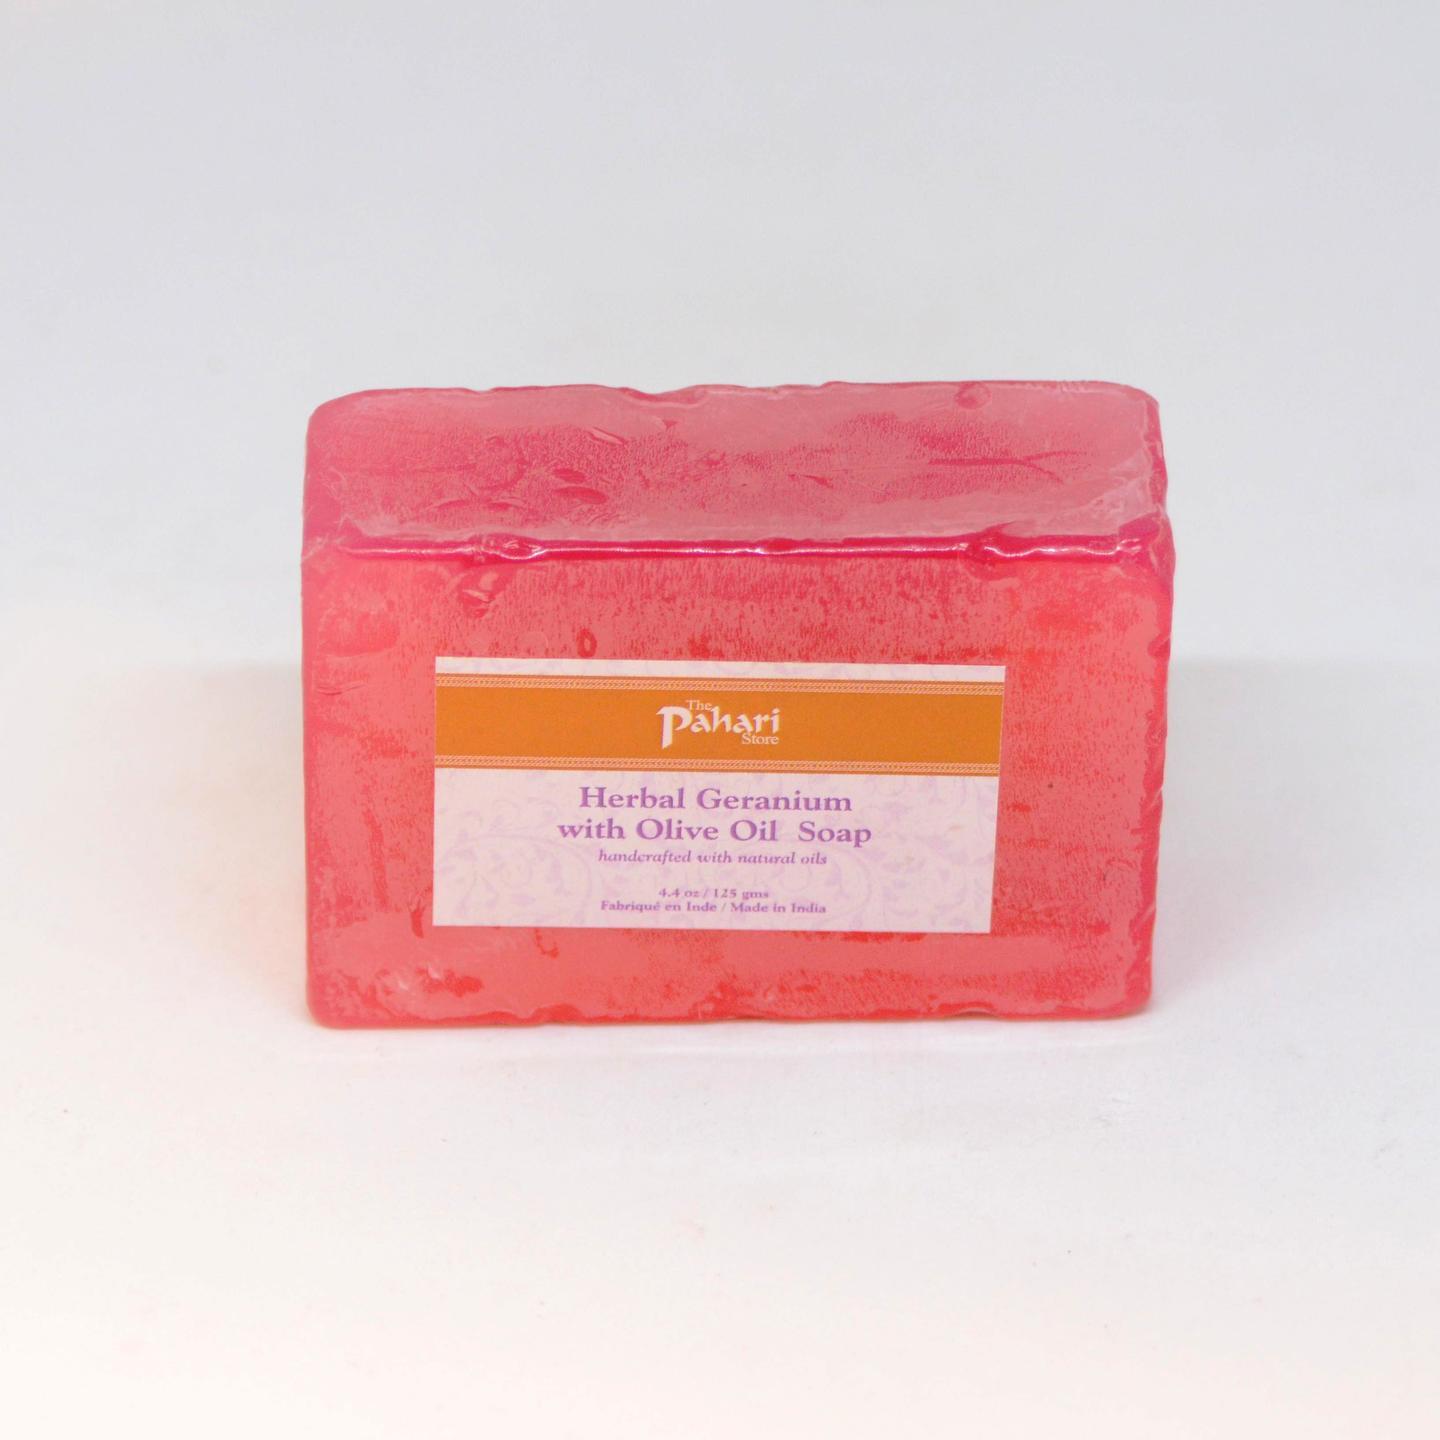 Herbal Geranium with Olive Oil Soap 125g